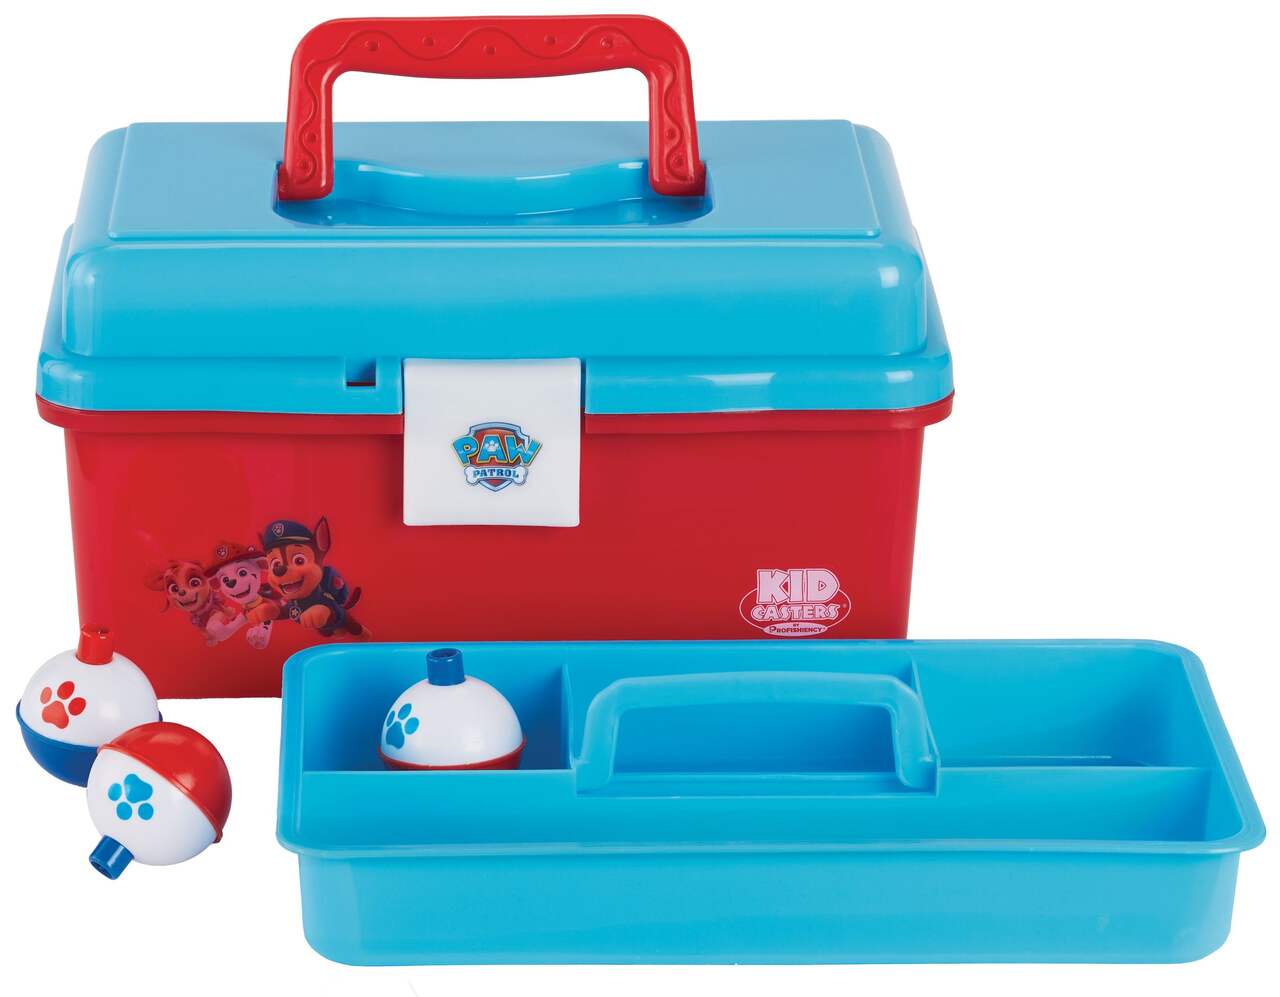 Kid Casters Paw Patrol Youth Fishing Kit - Red